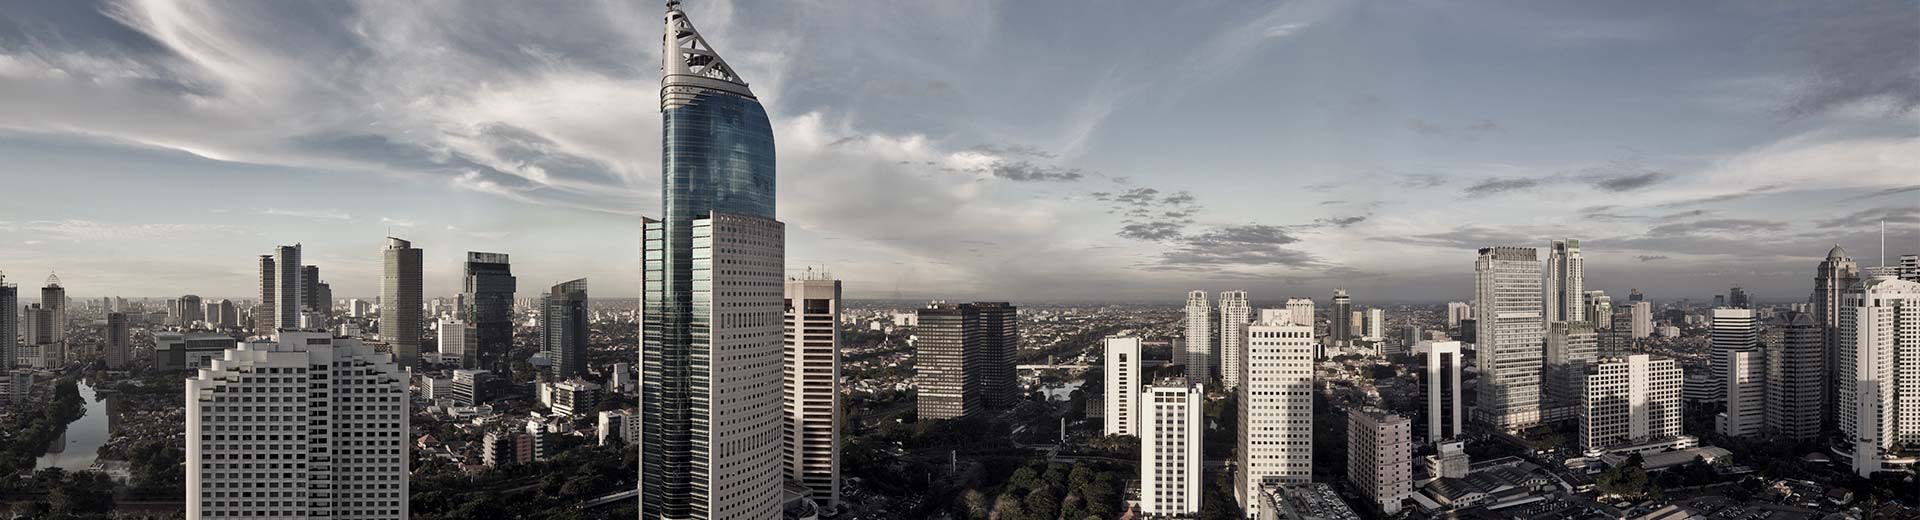 The sprawling mass of Jakarta stretches as far as the eye can see.